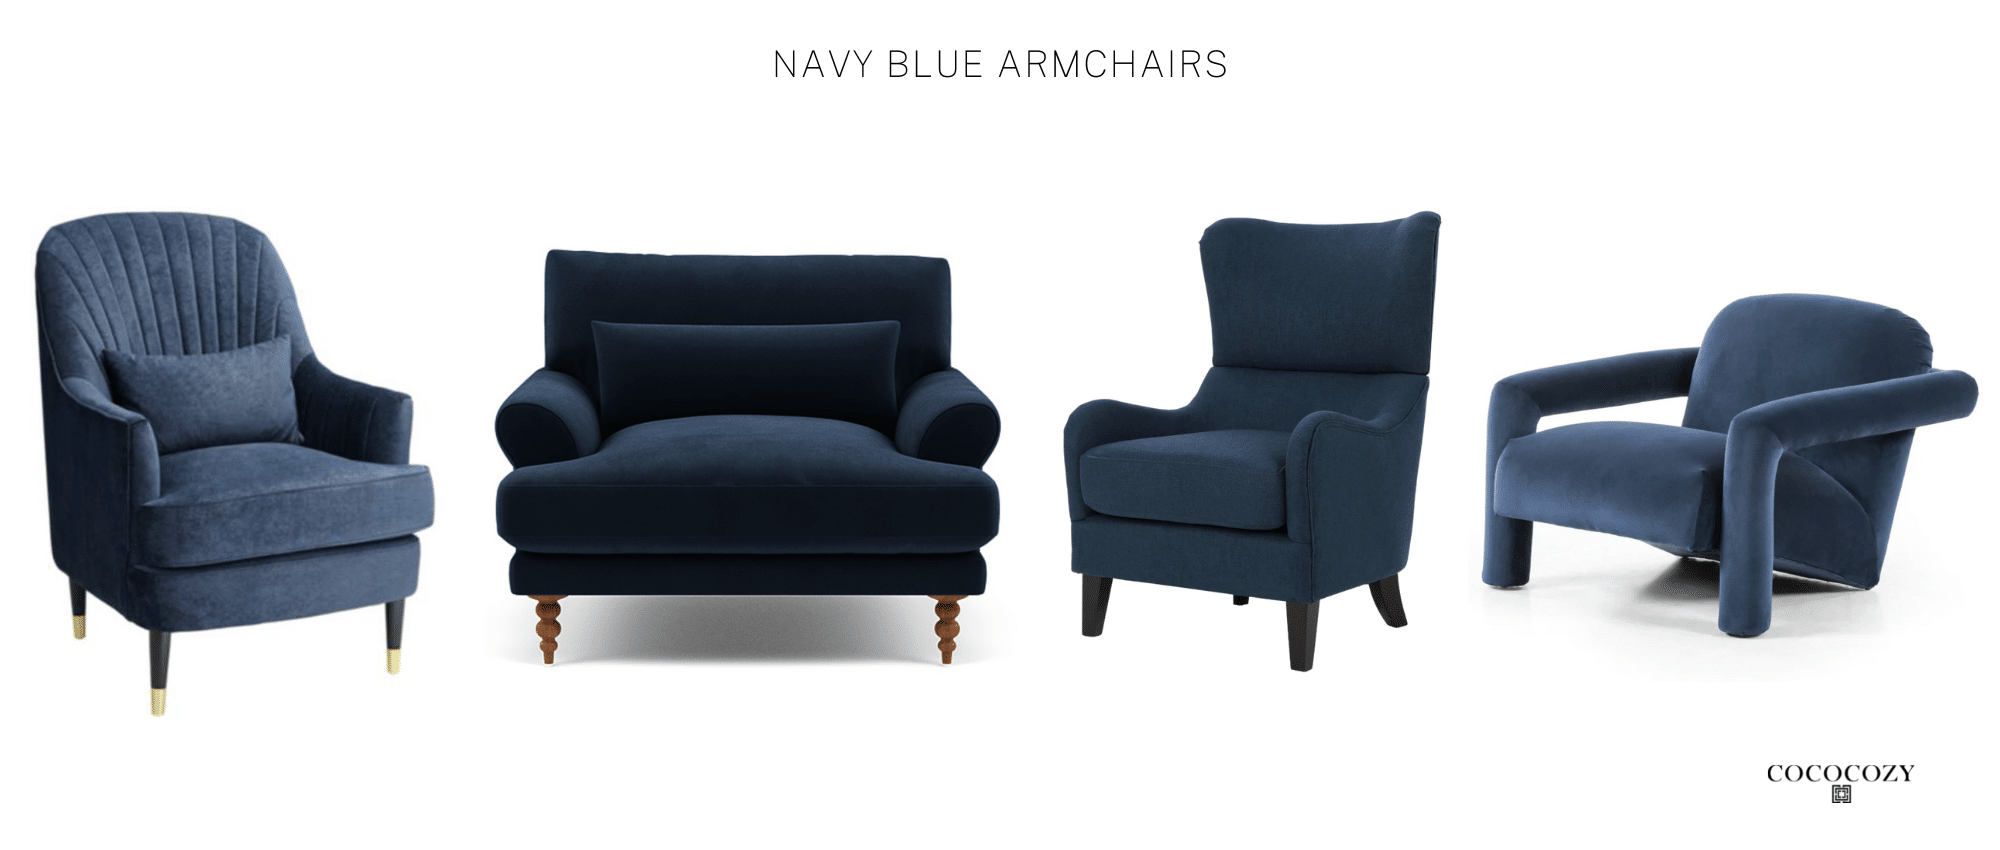 Alt tag for navy-blue-armchairs-furniture-cococozy